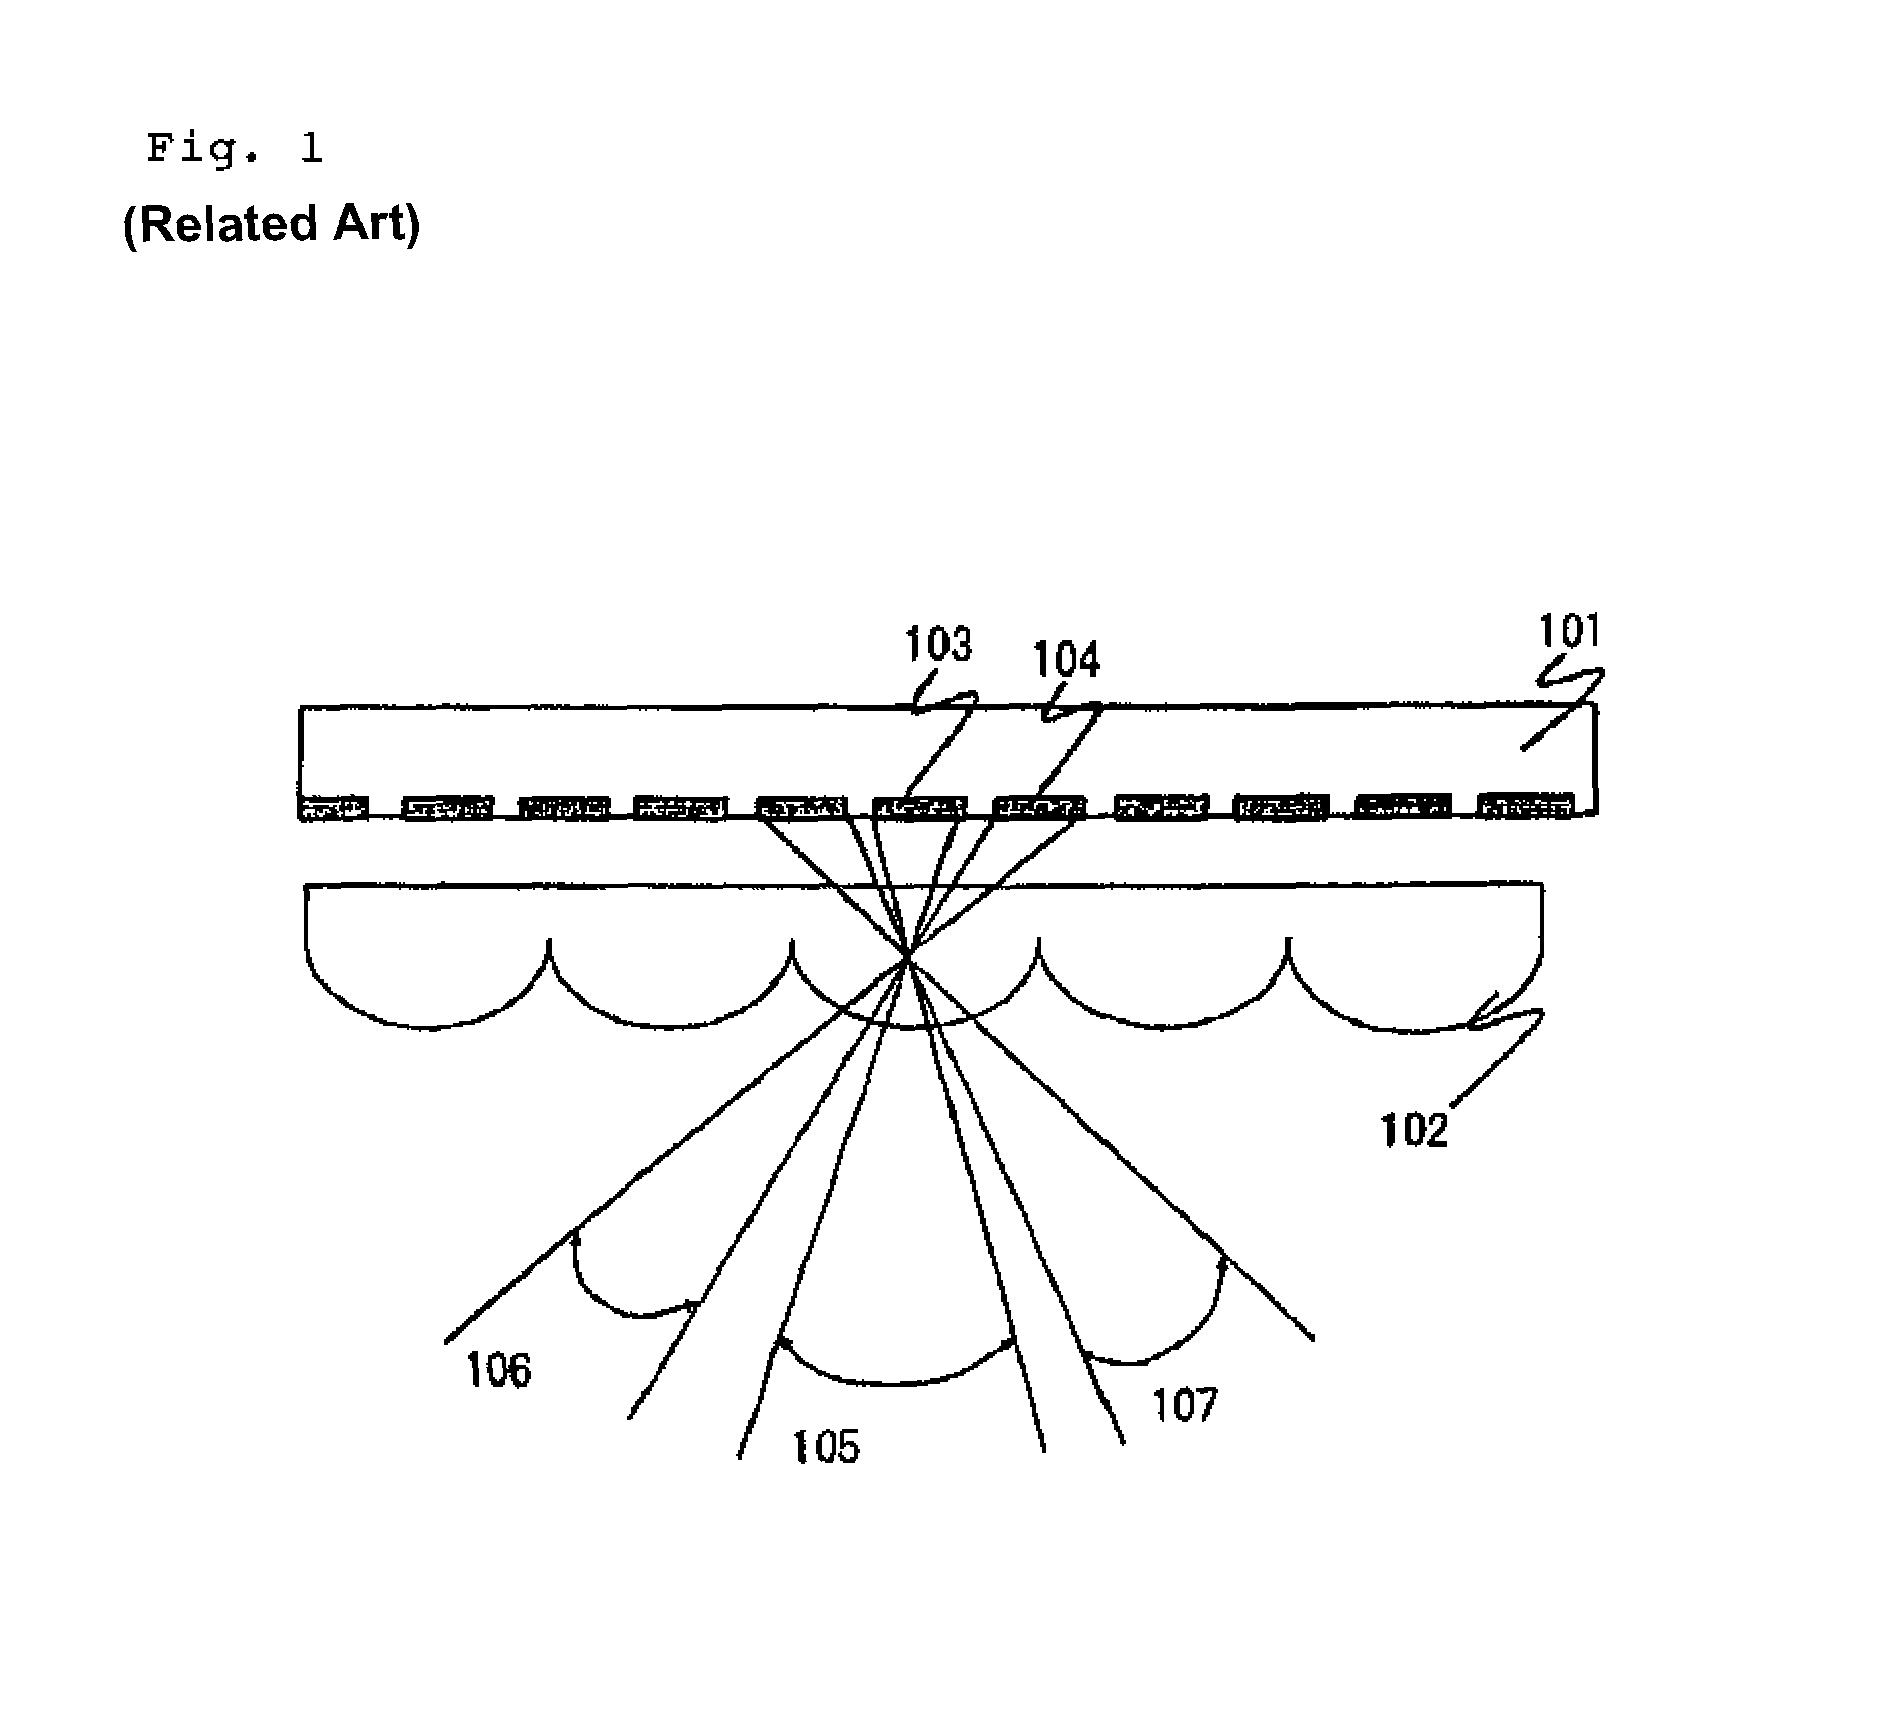 Display device with lens array or parallax barrier that switches between narrow view mode and wide view mode